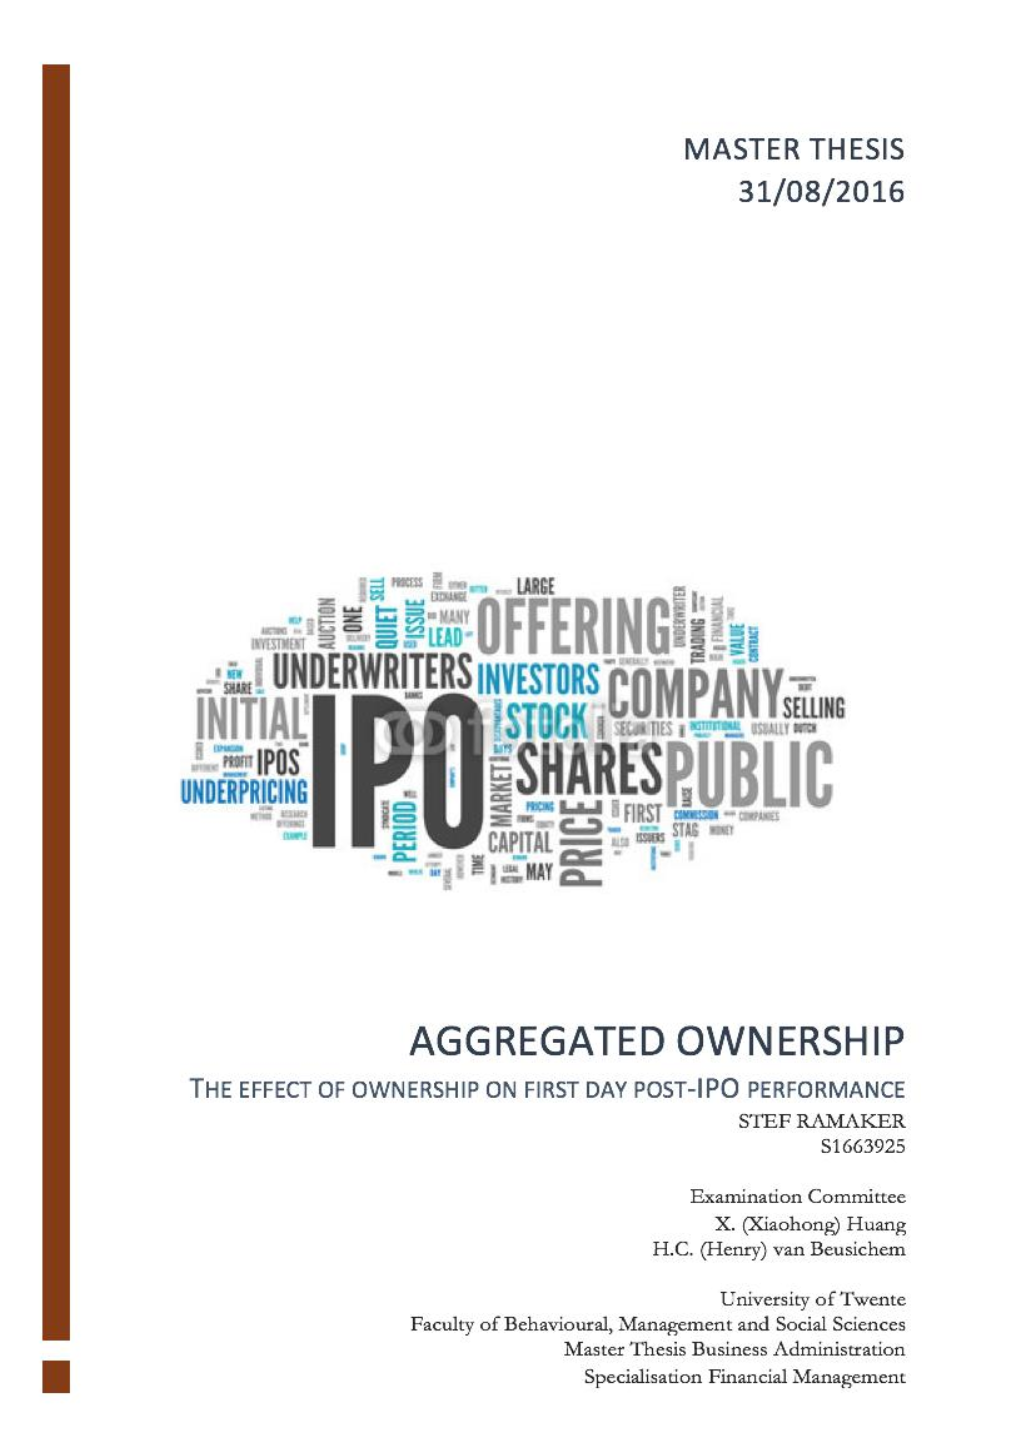 Aggregated Ownership to Include All Types and Sizes of Ownership